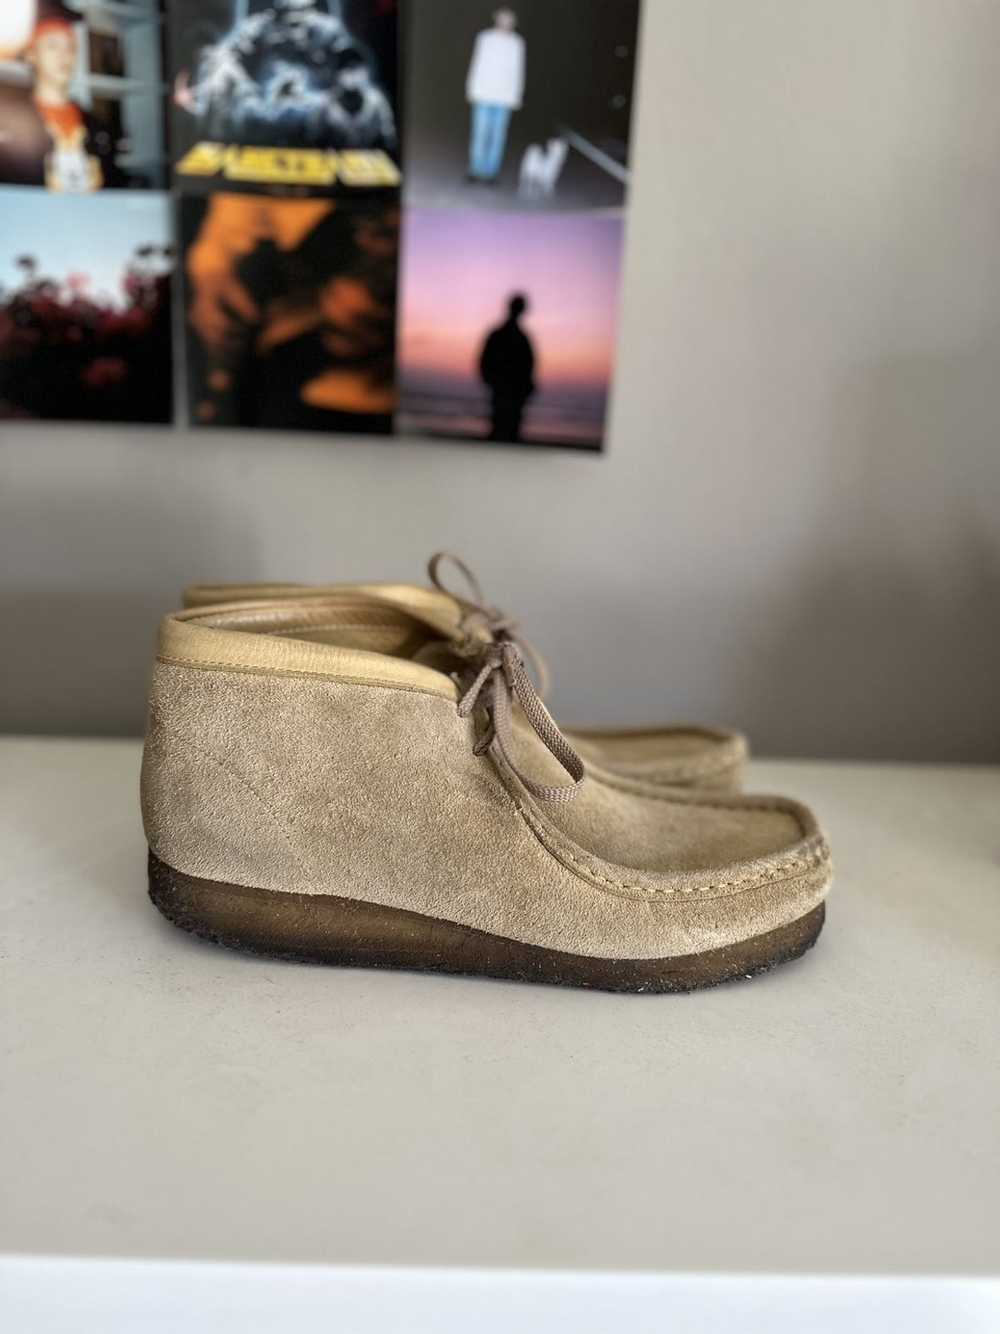 Clarks Clarks Wallabees - image 1